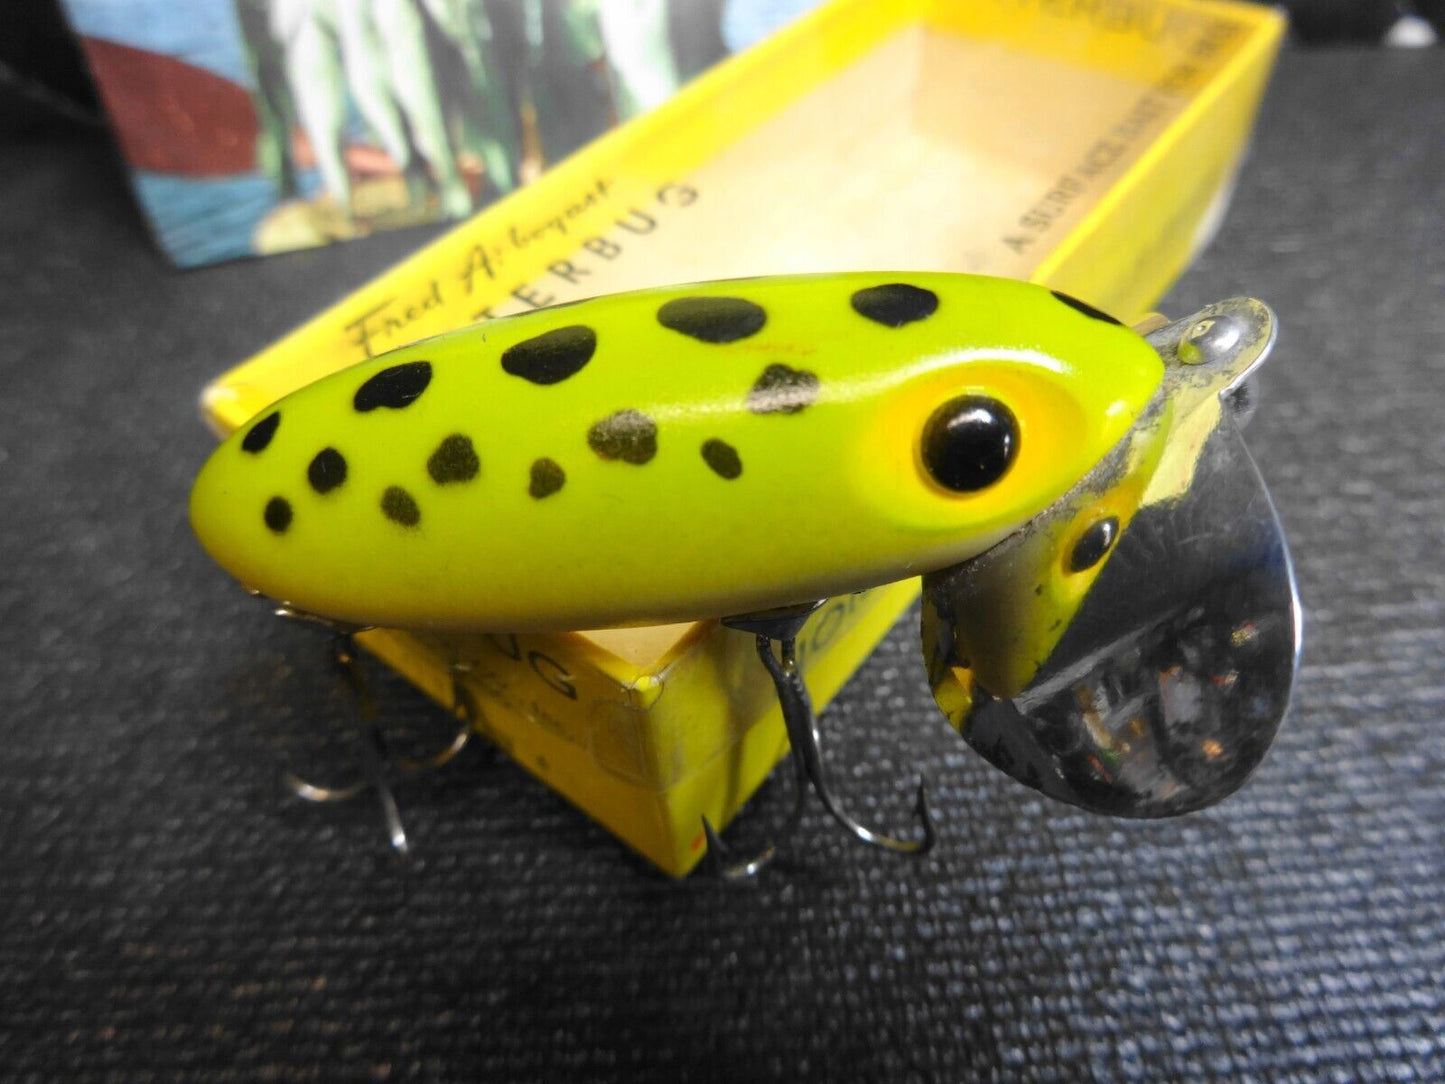 Fred Arbogast Jitterbug  Green Frog 601-F Fishing Lure, Box, Pamphlet